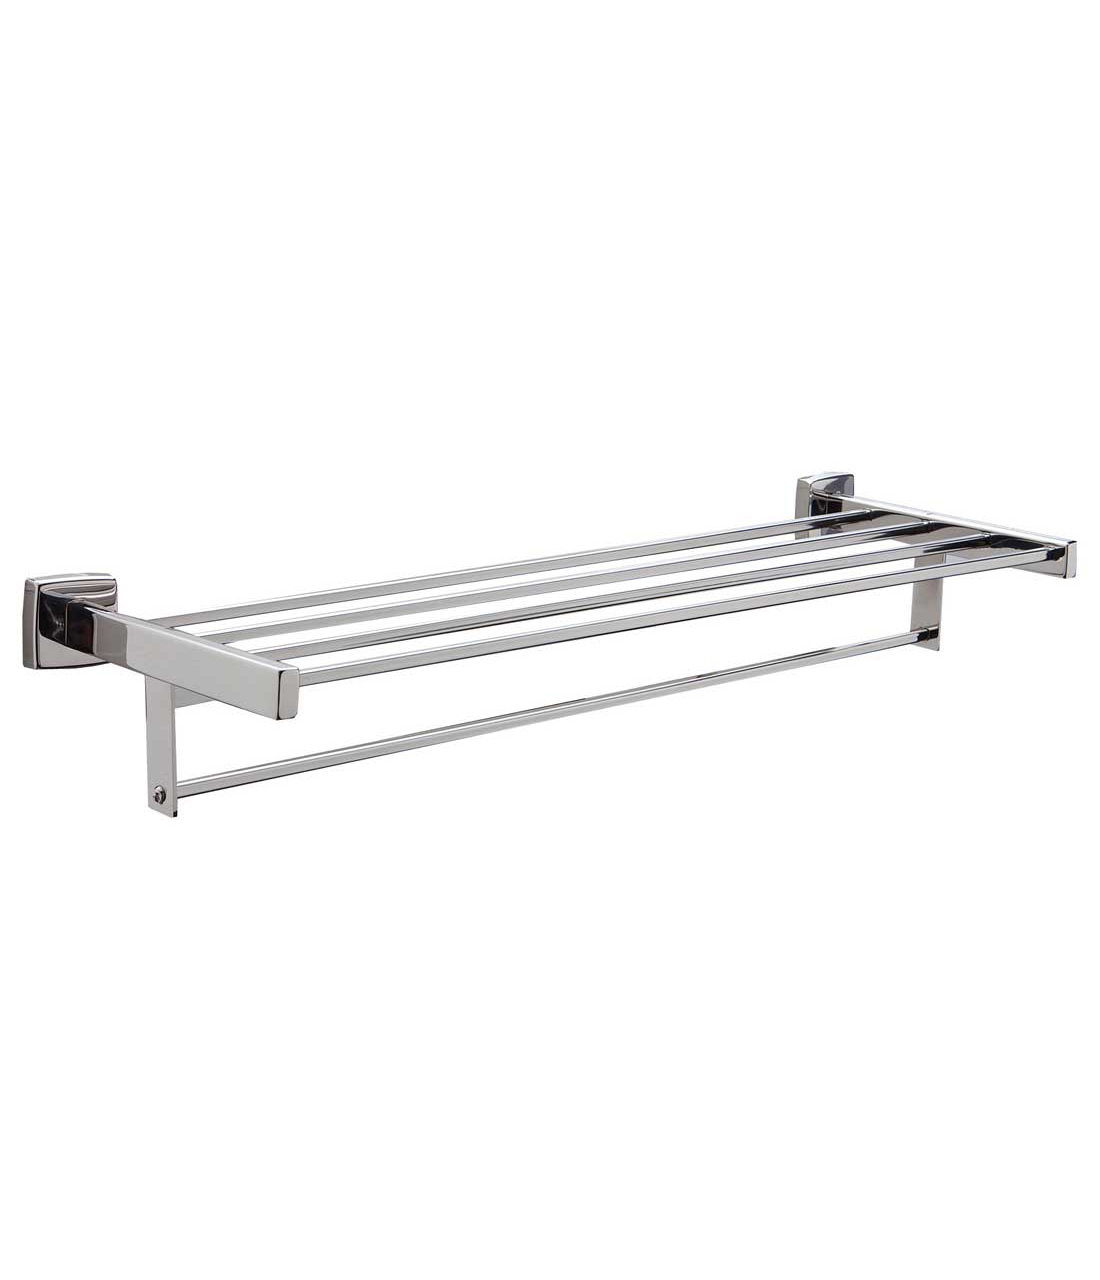 Surface-Mounted Towel Shelf with Towel Bar (Bright) - (Model #: 7676x24)-image